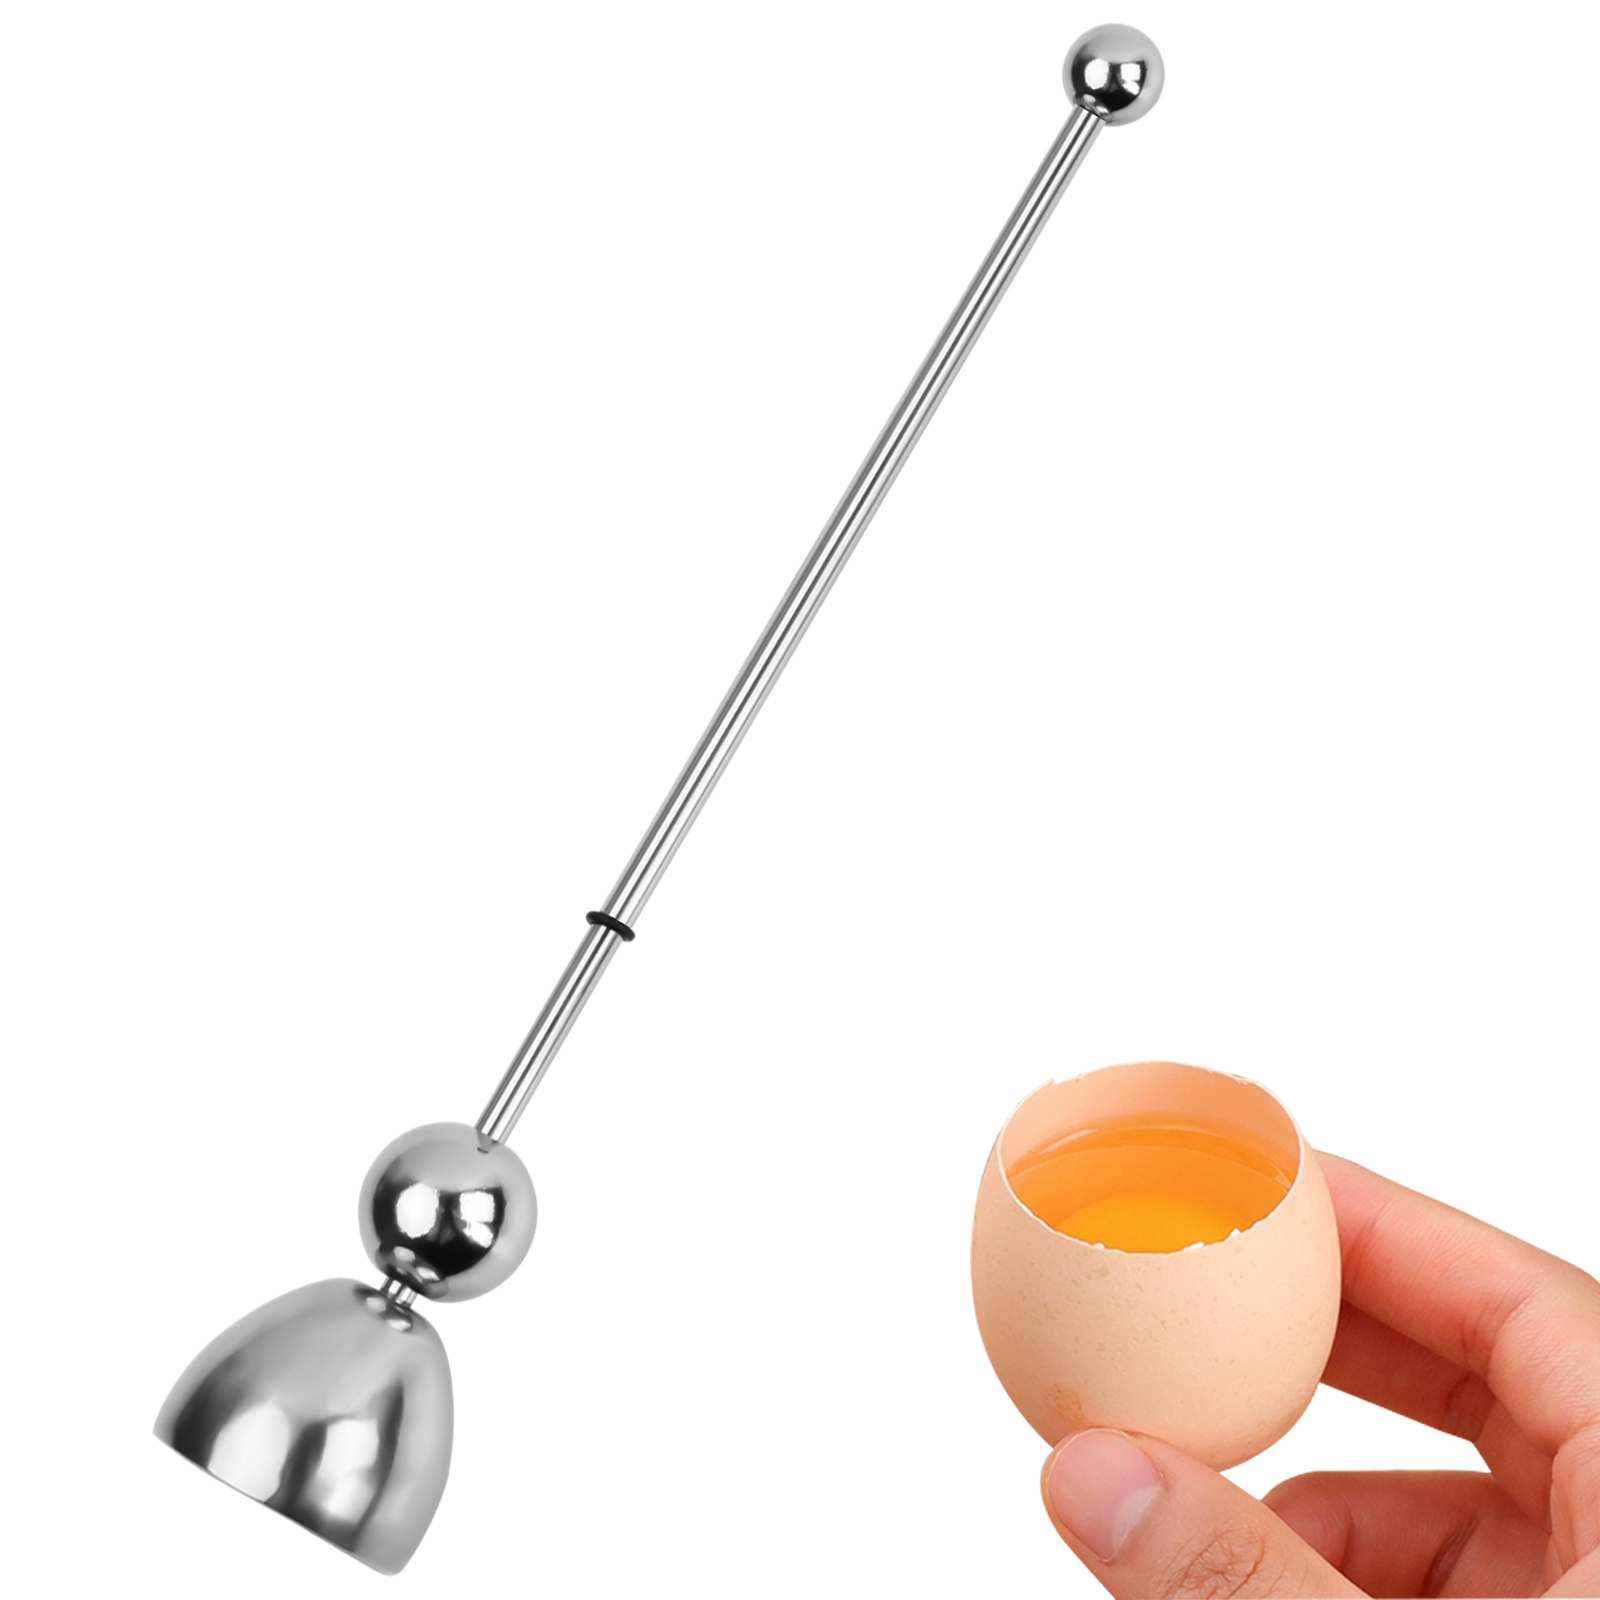 Stainless Steel Egg Cutter Hexagonal Cutting Cooked Egg Tool